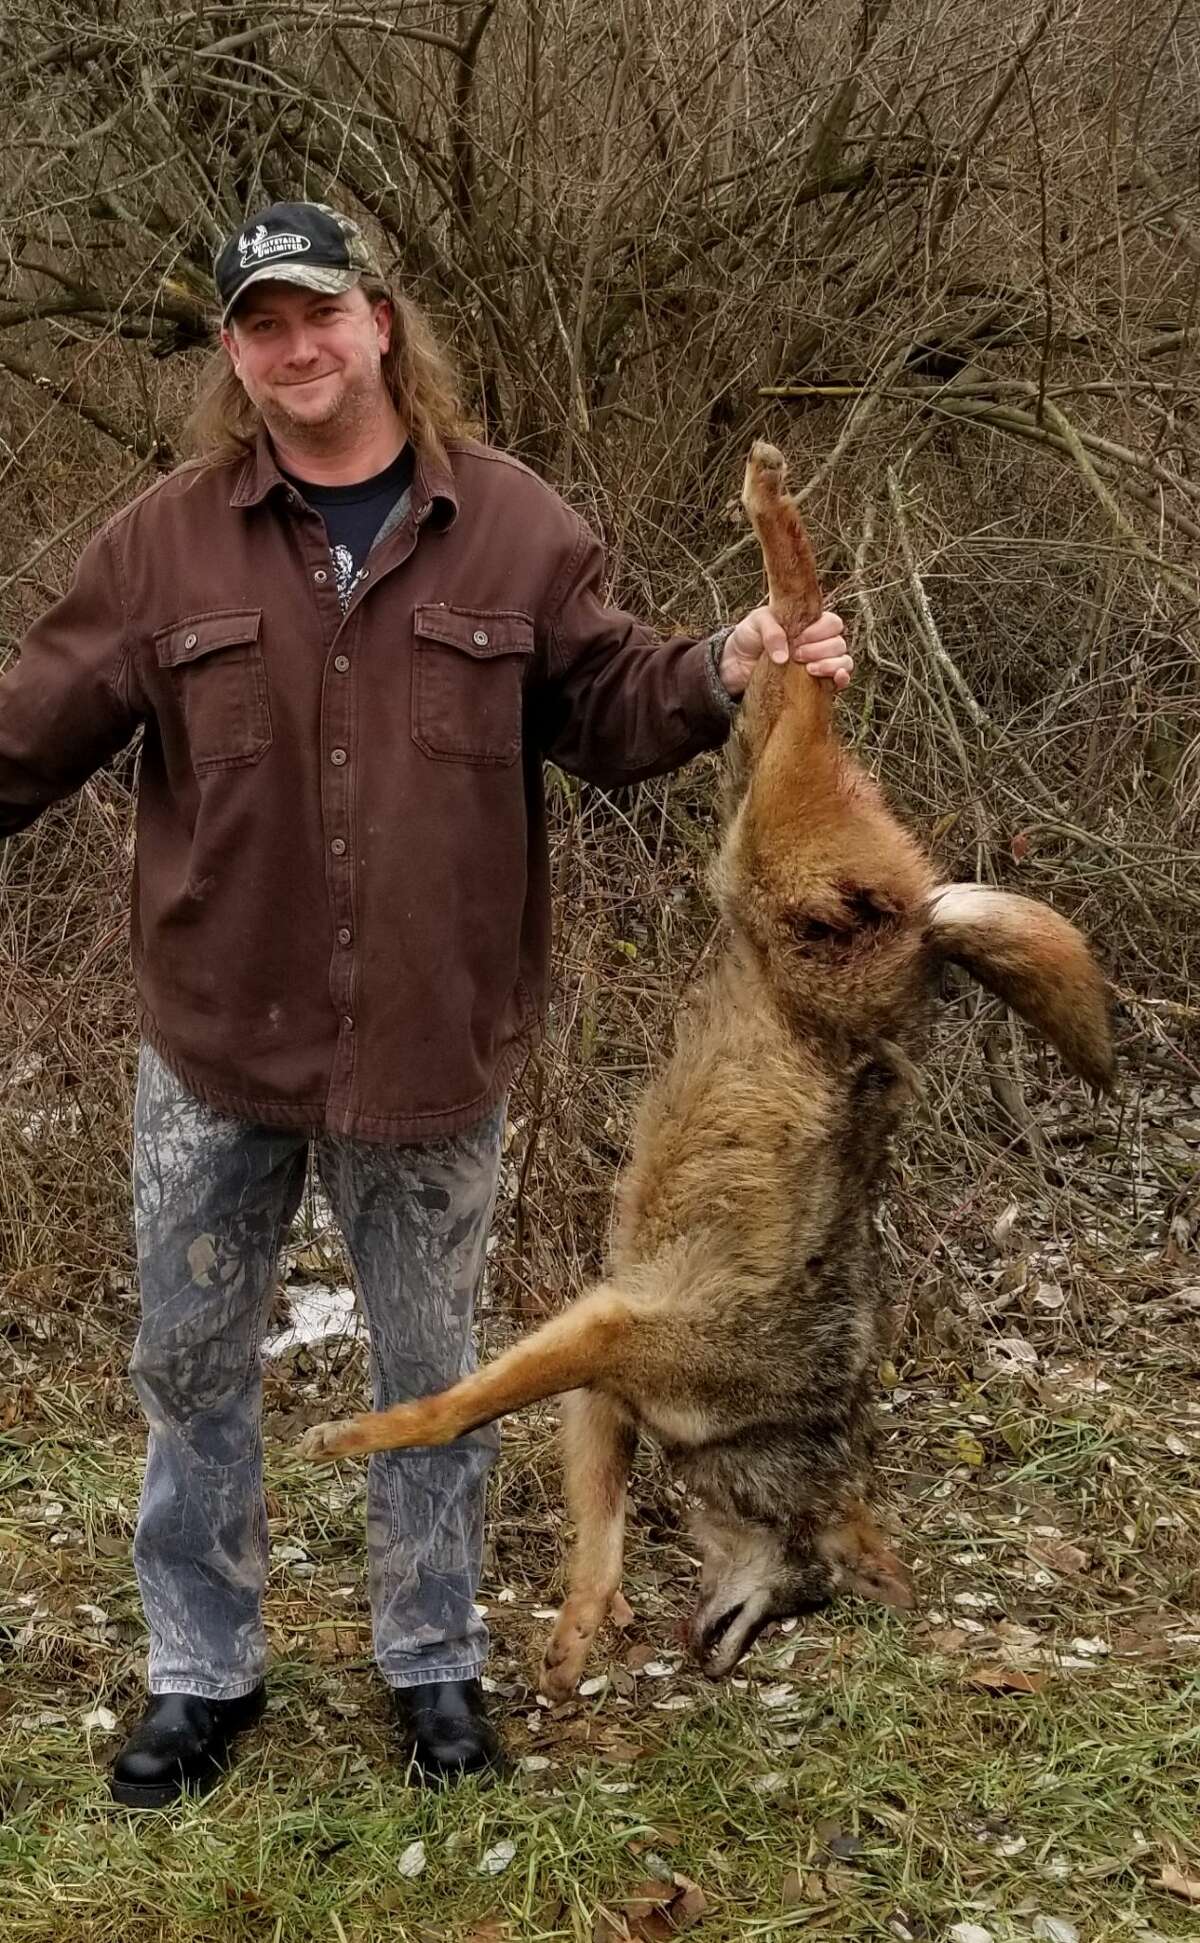 Avid predator hunter Don Burnette, of Cass City, was tracking a pair of Thumb coyotes in an effort to push them to his son Zack, who was waiting down a fencerow, when Don jumped this large male coyote at 15 yards and shot it at 75 yards using a .204 Ruger rifle.